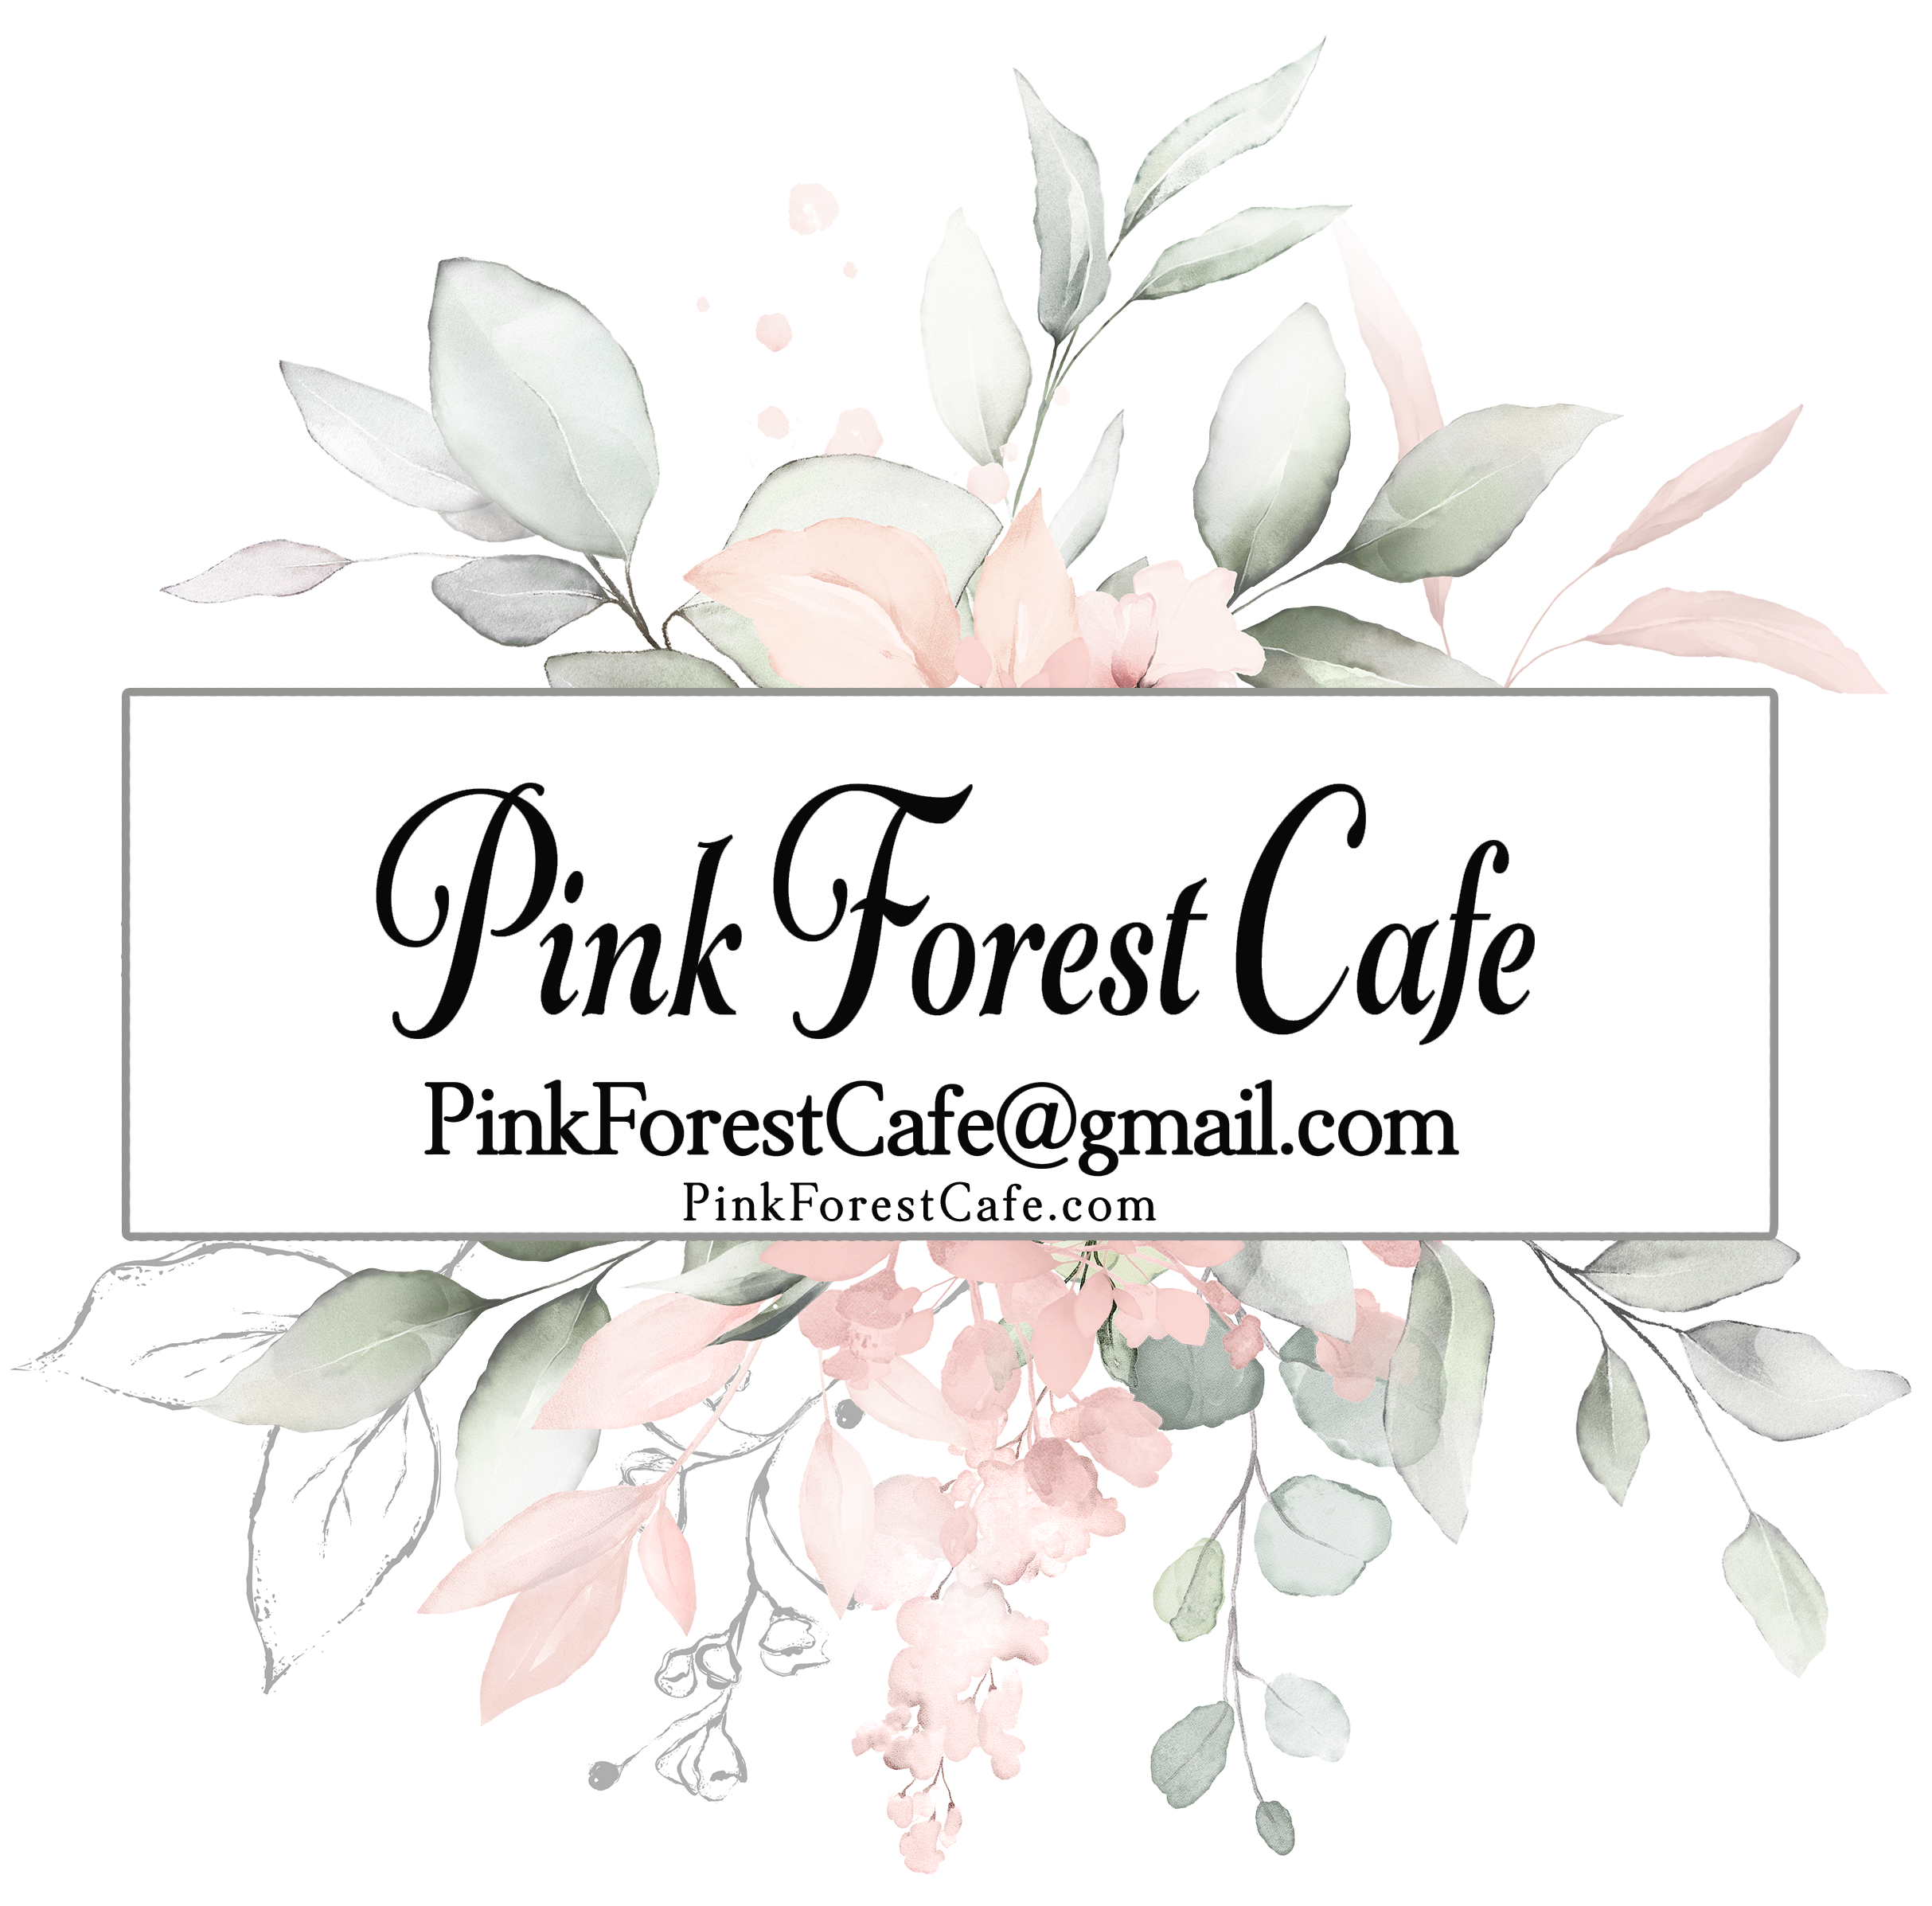 Order My Print - Pink Forest Cafe - 1 Single Design Print - Printed and Shipped